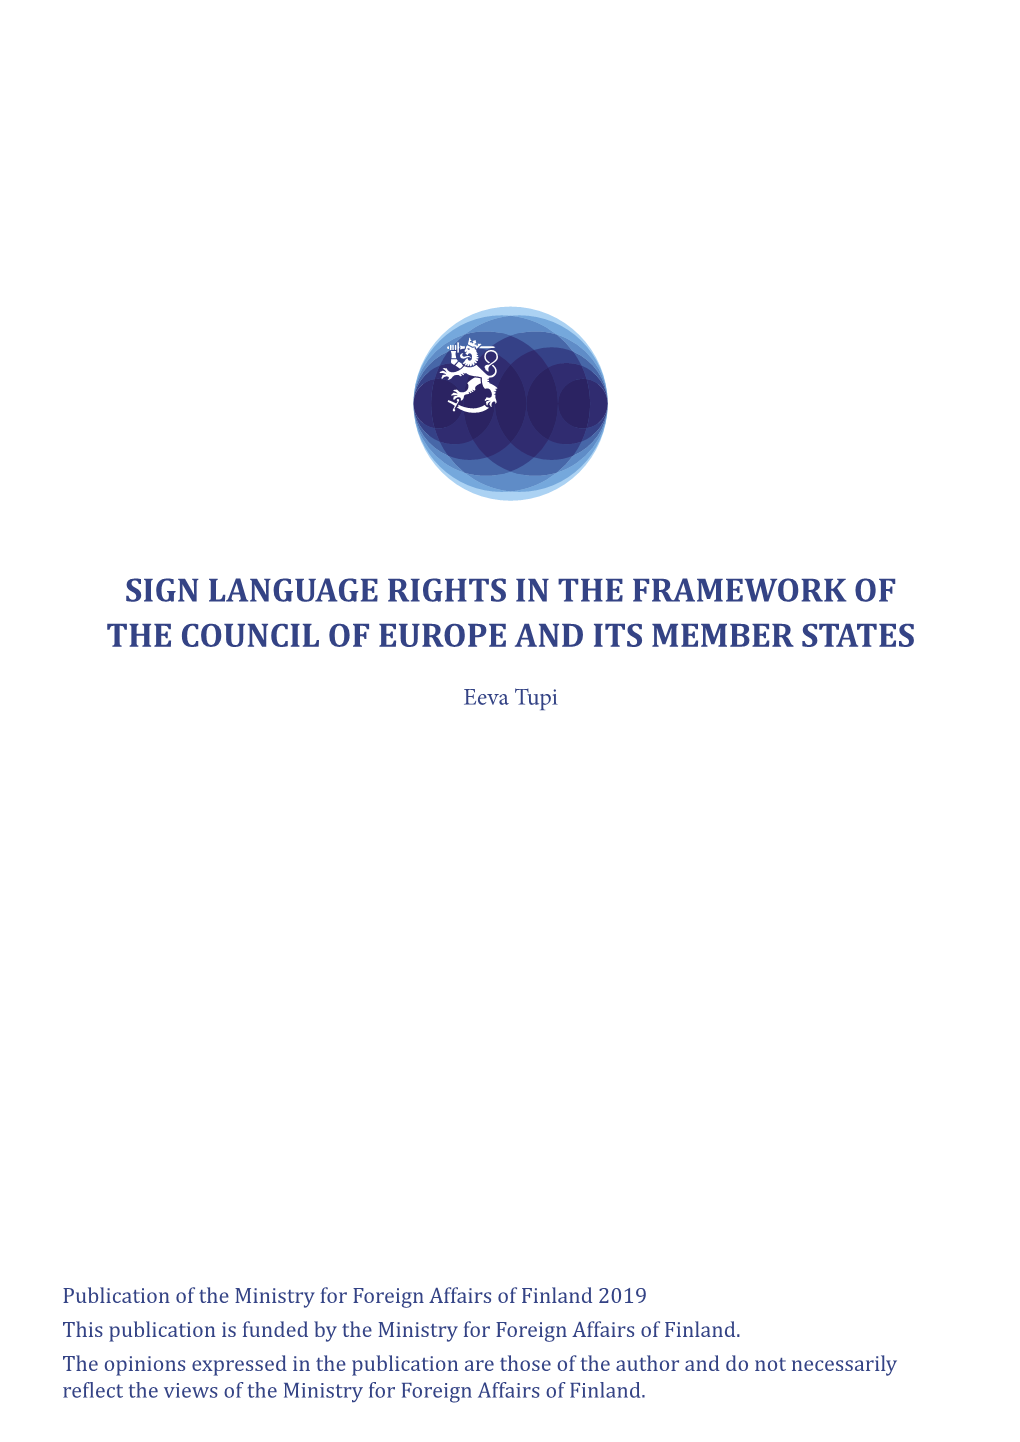 Sign Language Rights in the Framework of the Council of Europe and Its Member States